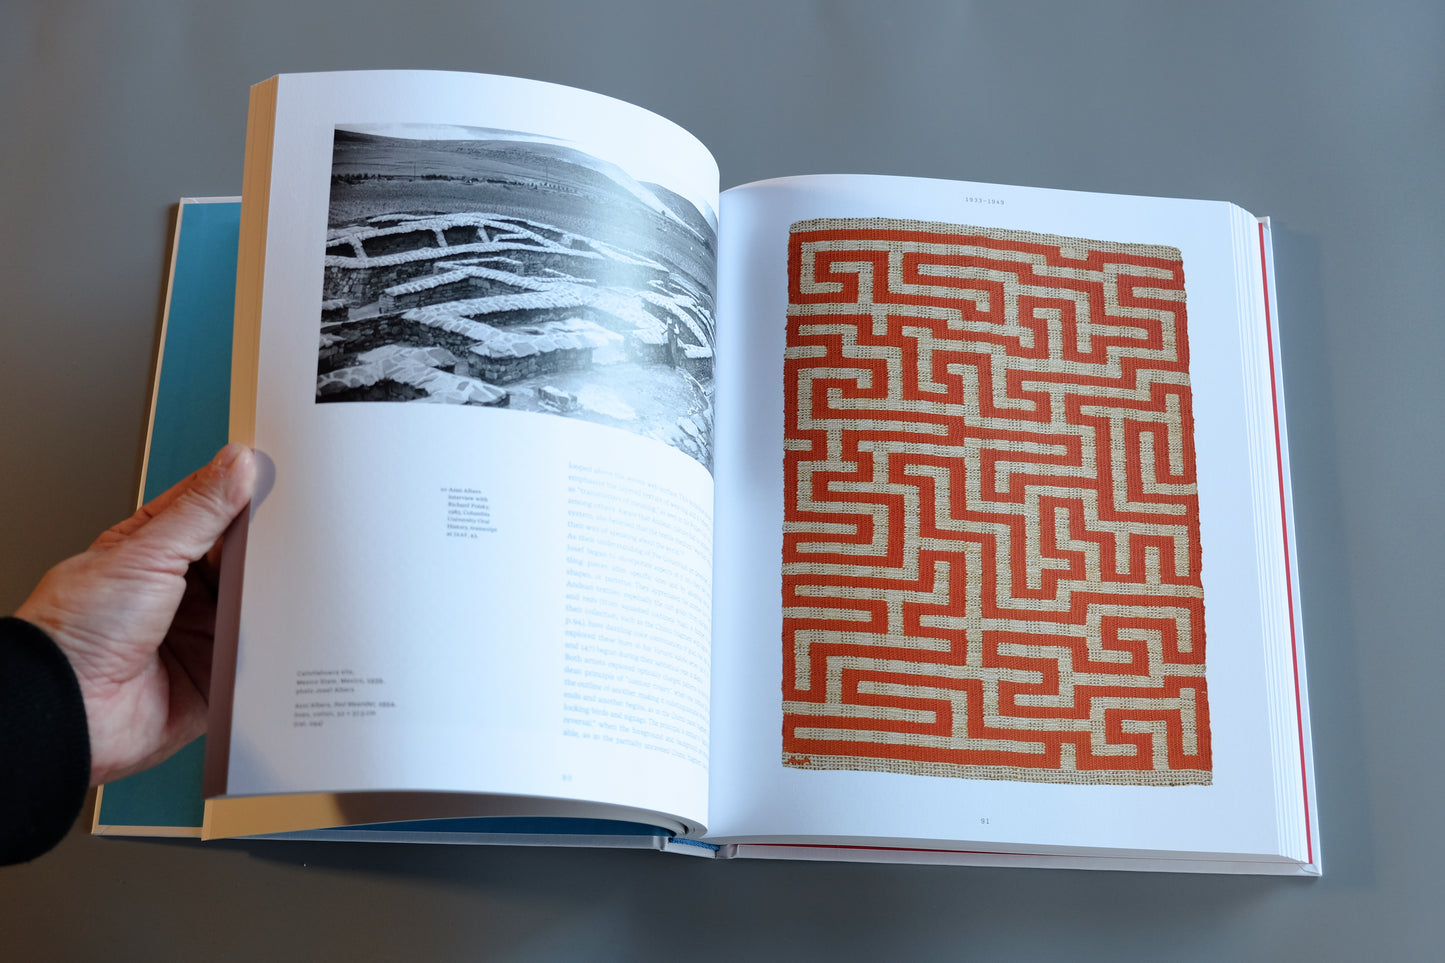 Art Book  『 ART AND LIFE by Anni Albers, Josef Albers』